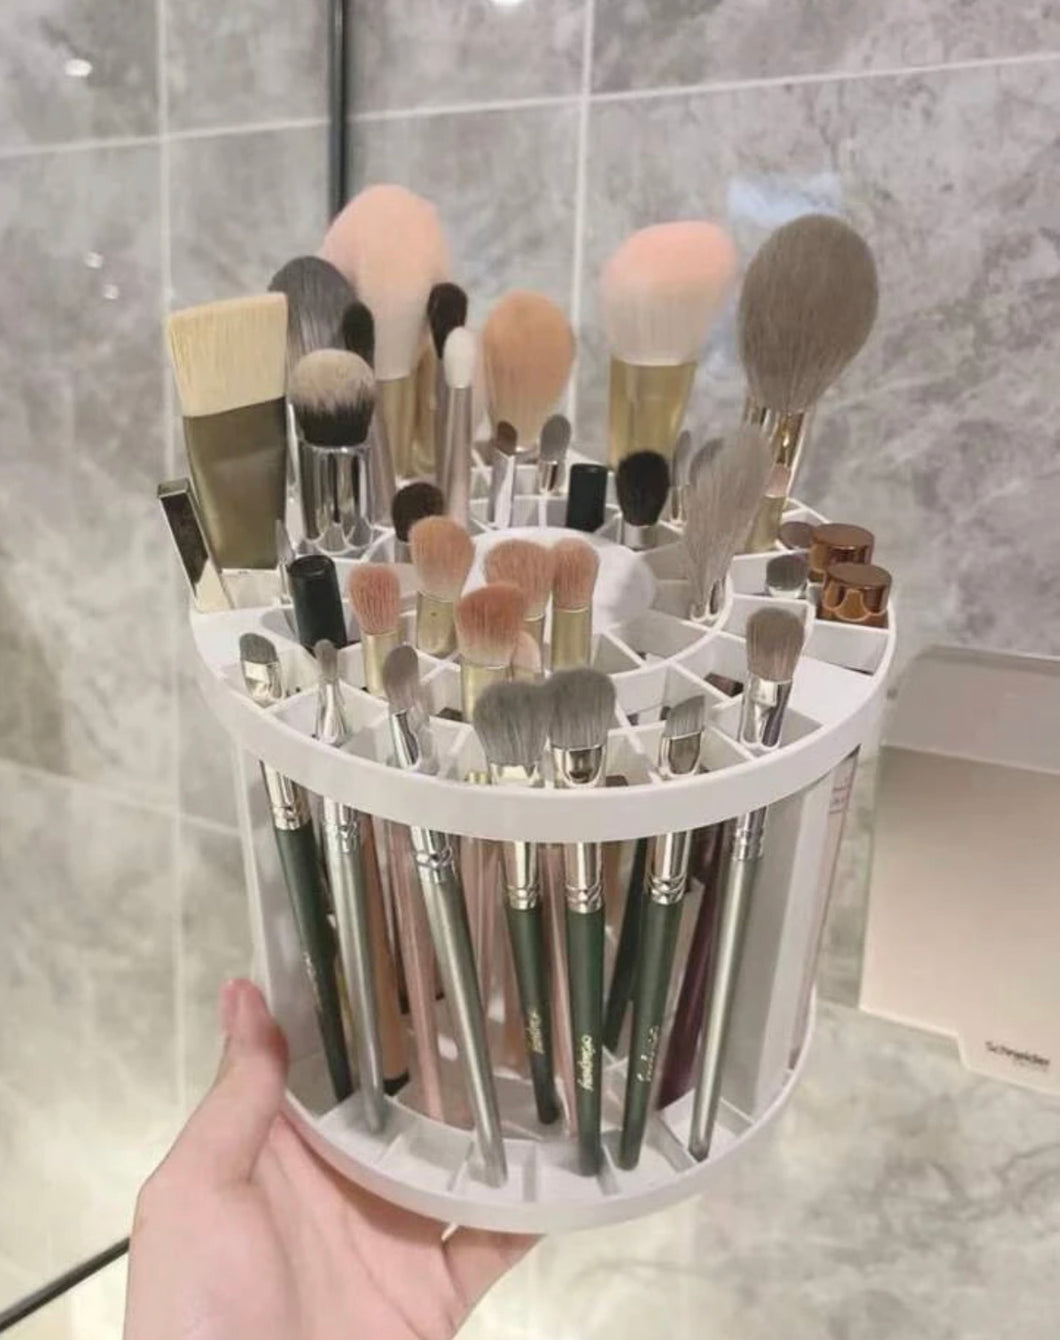 Storage Stand for makeup brushes or pens.